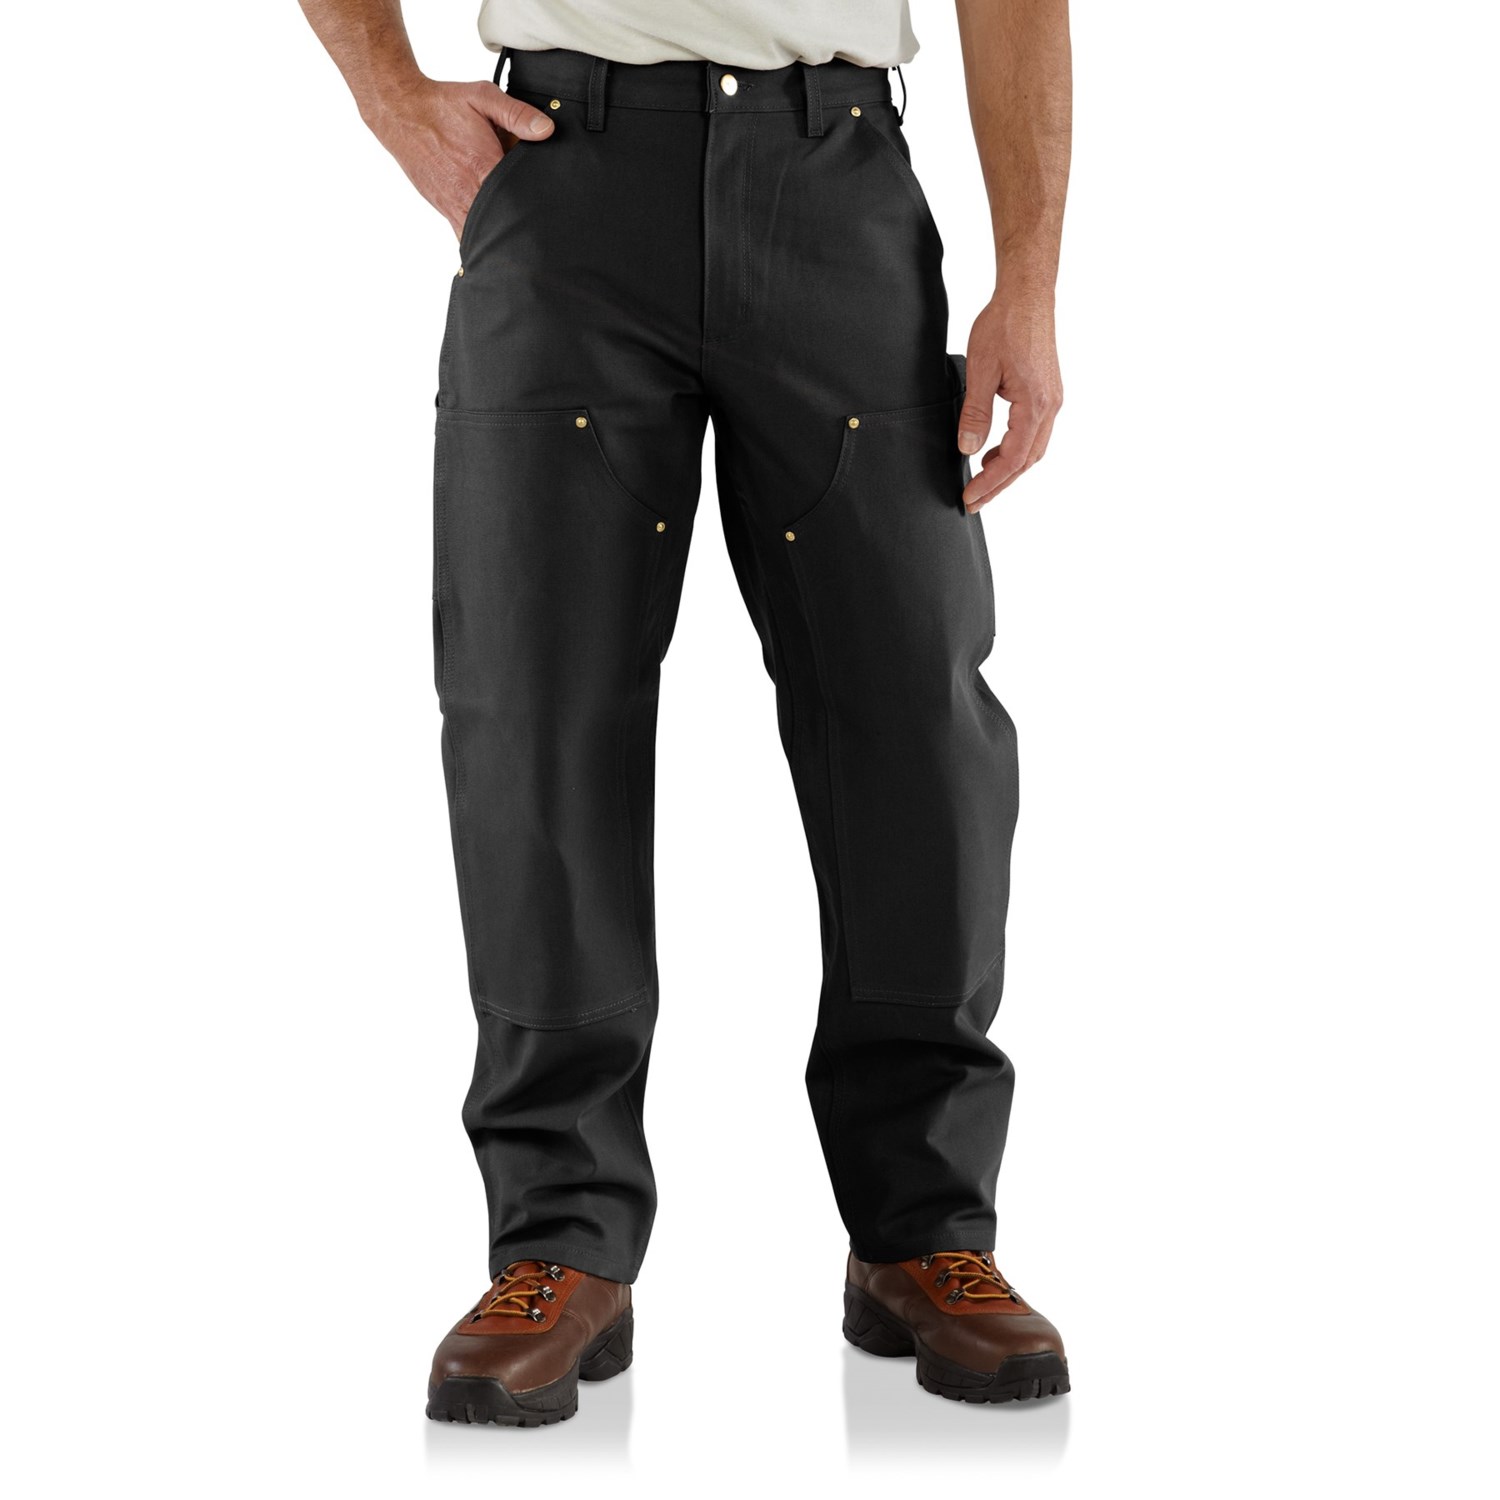 Carhartt B01 Big and Tall Loose Fit Duck Utility Work Pants - Factory Seconds